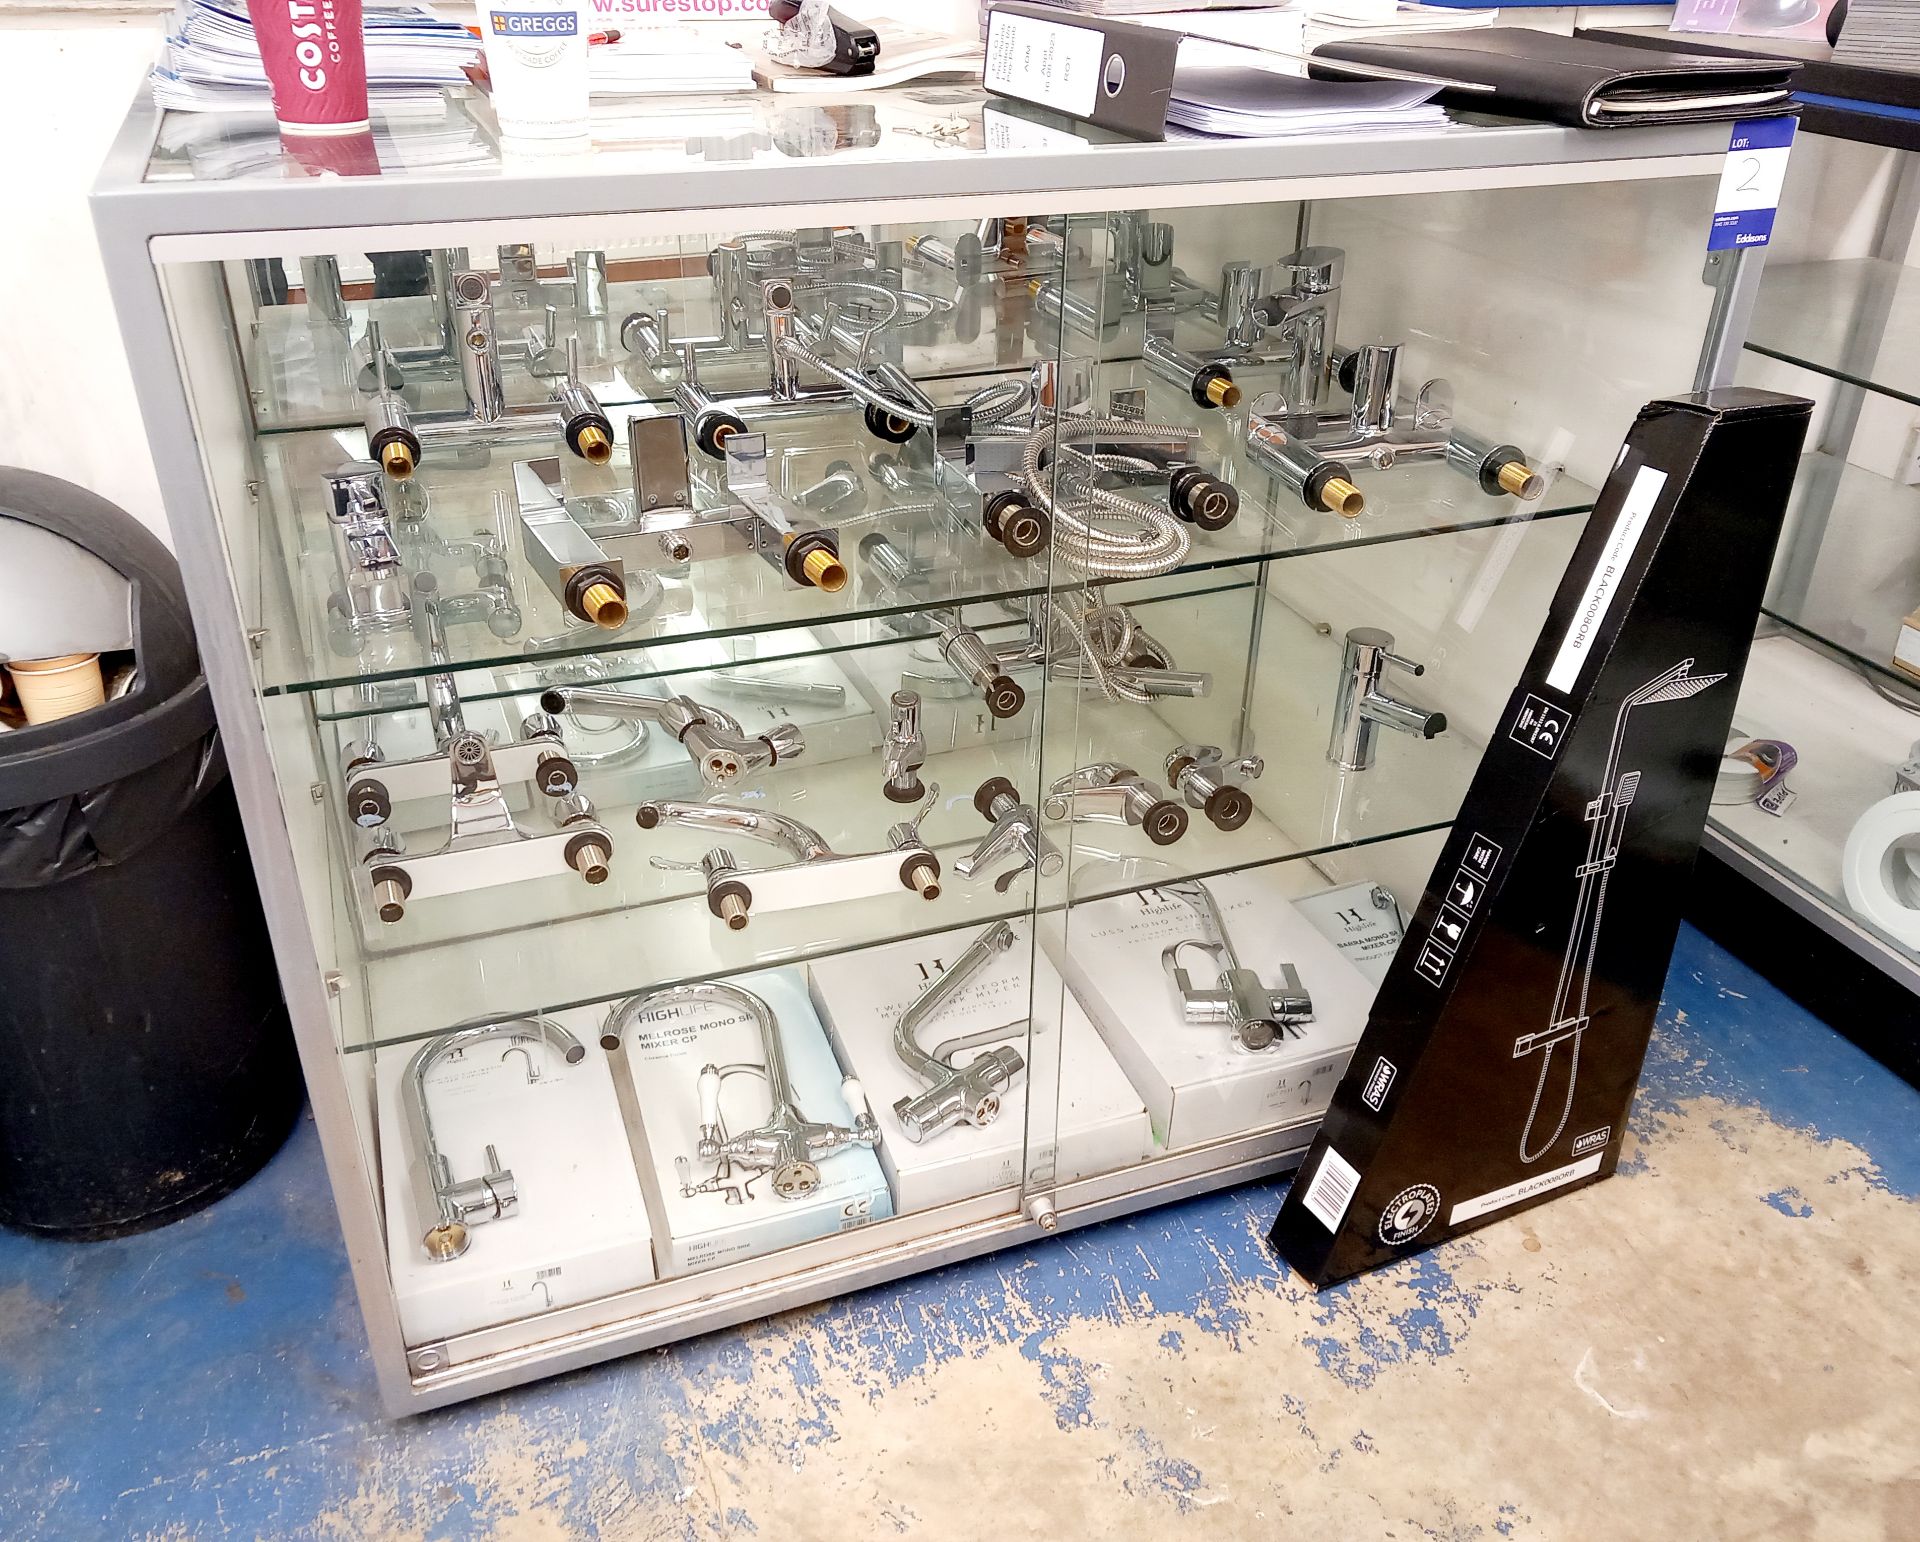 Approximately 20 x various chrome mixer taps to glass cabinet (included) with shower system. This